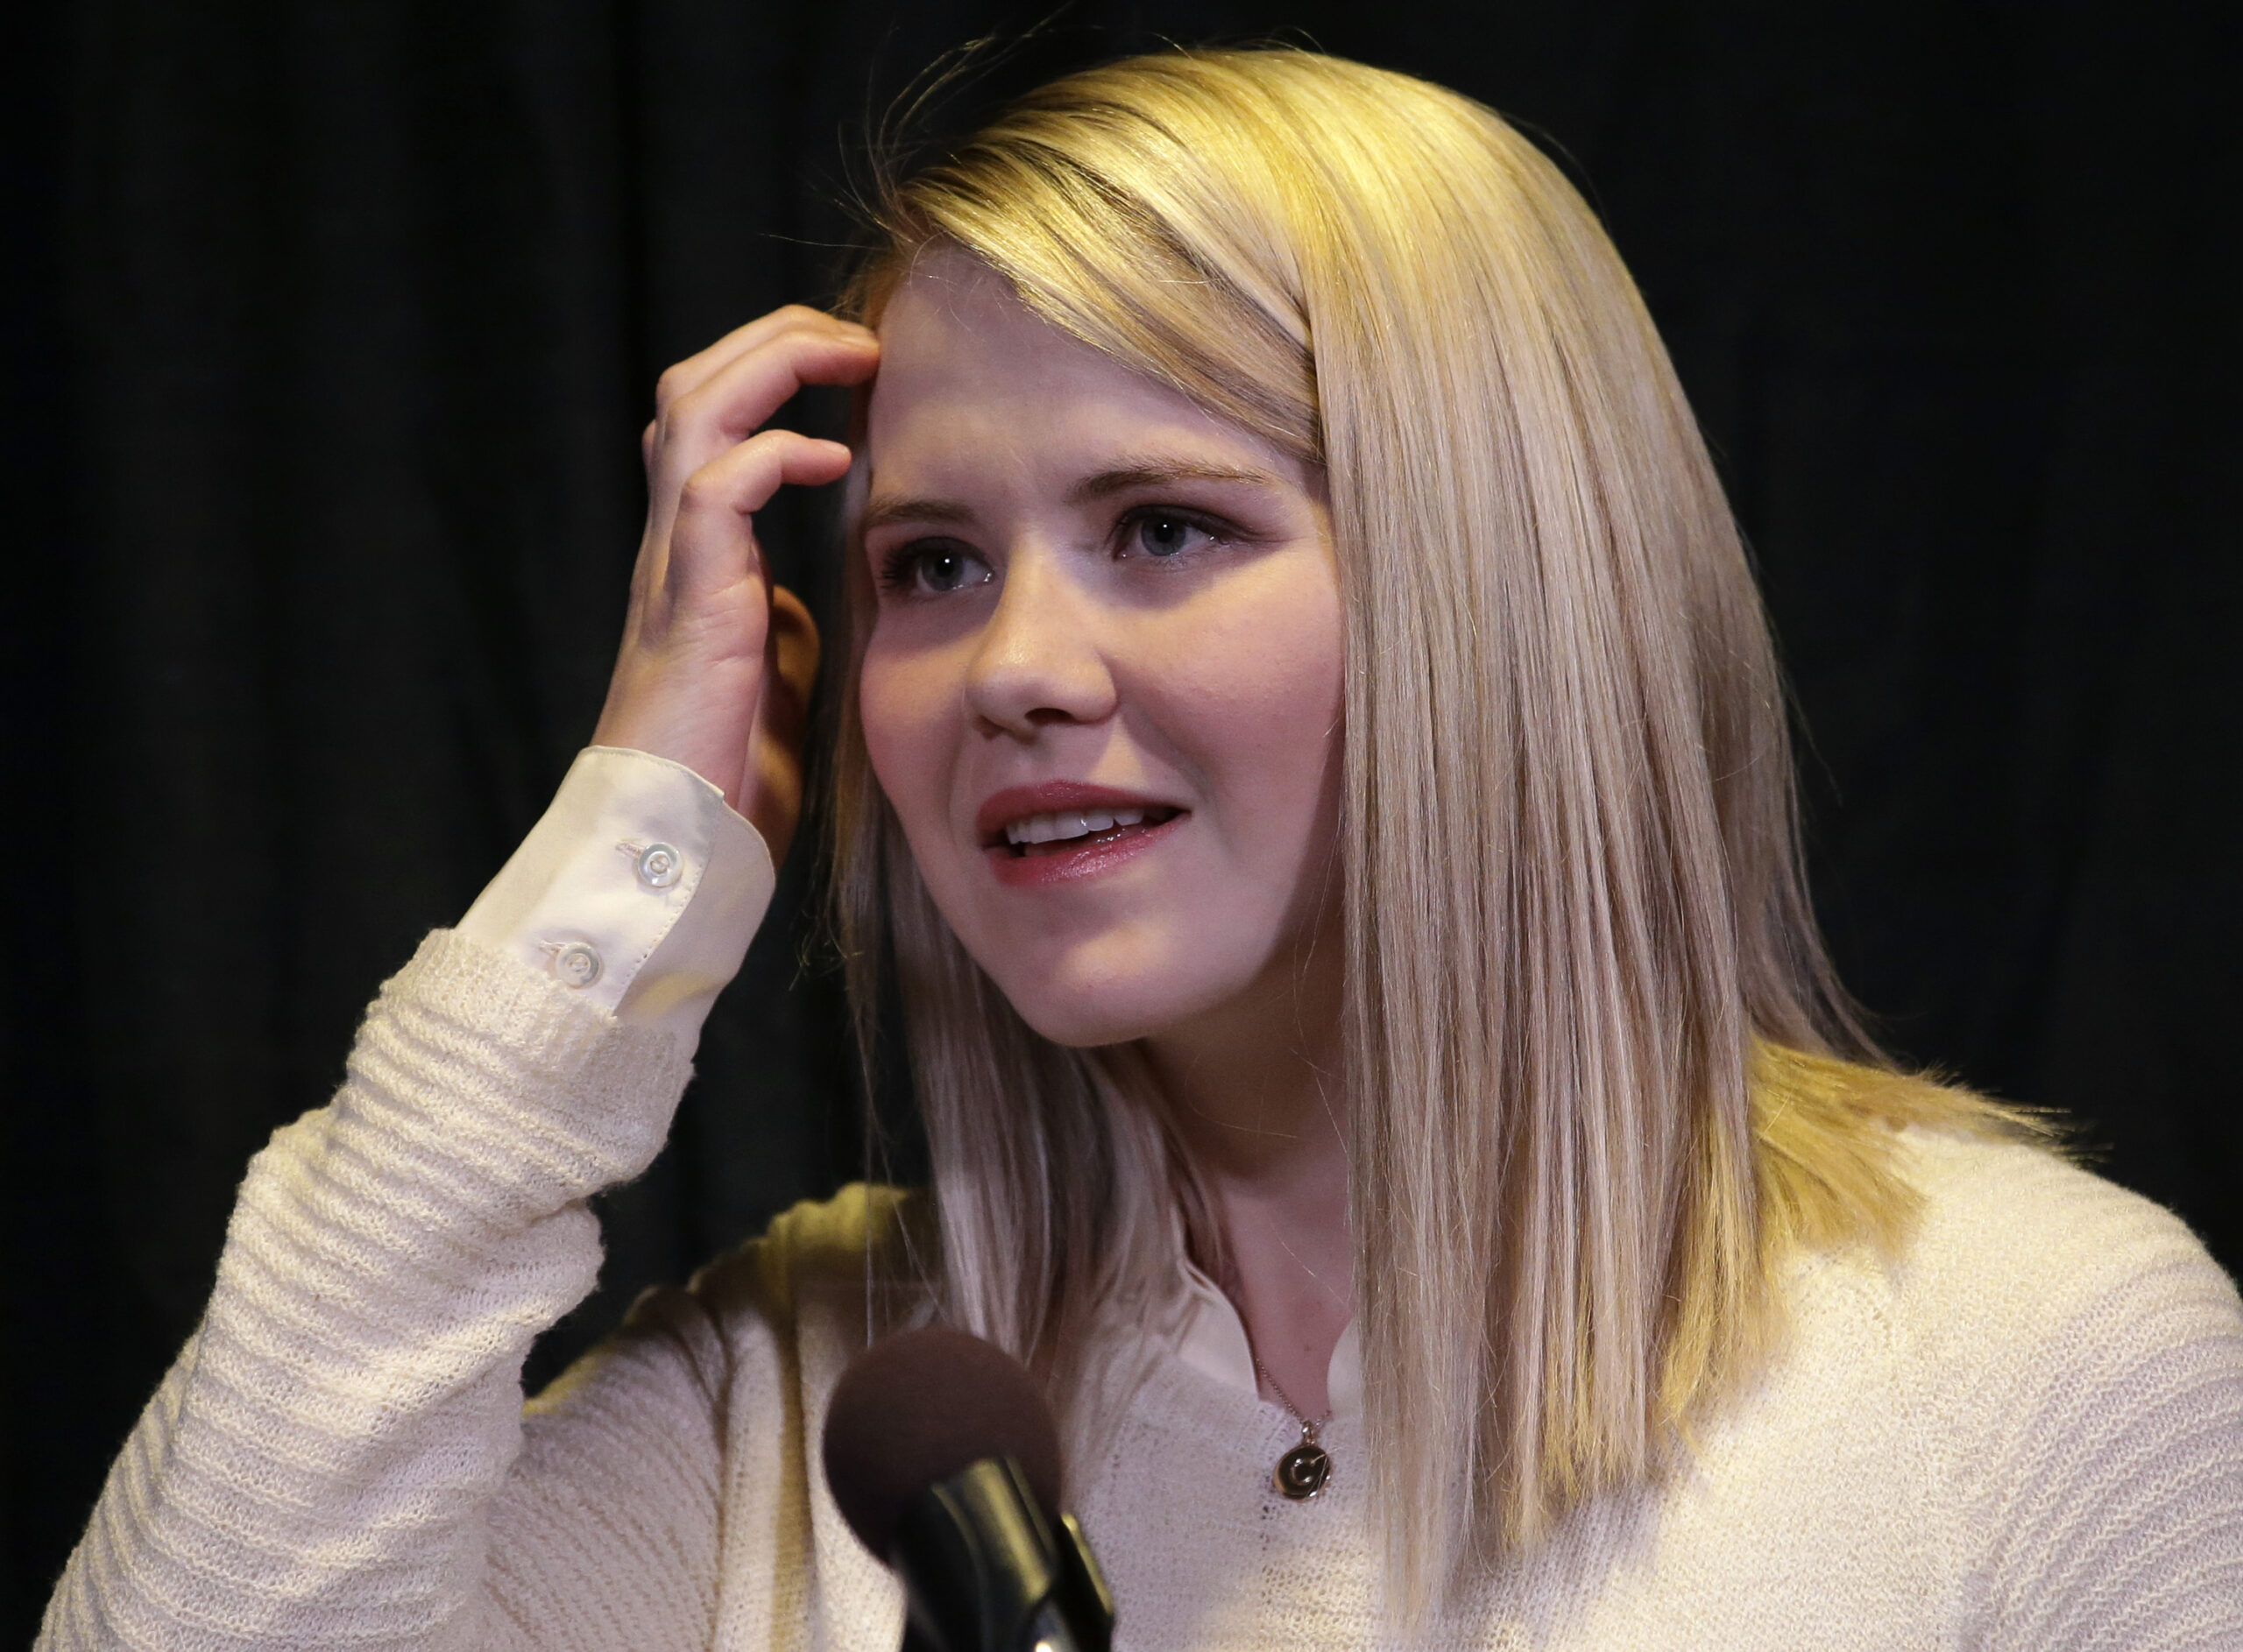 Elizabeth Smart looks on during a news conference